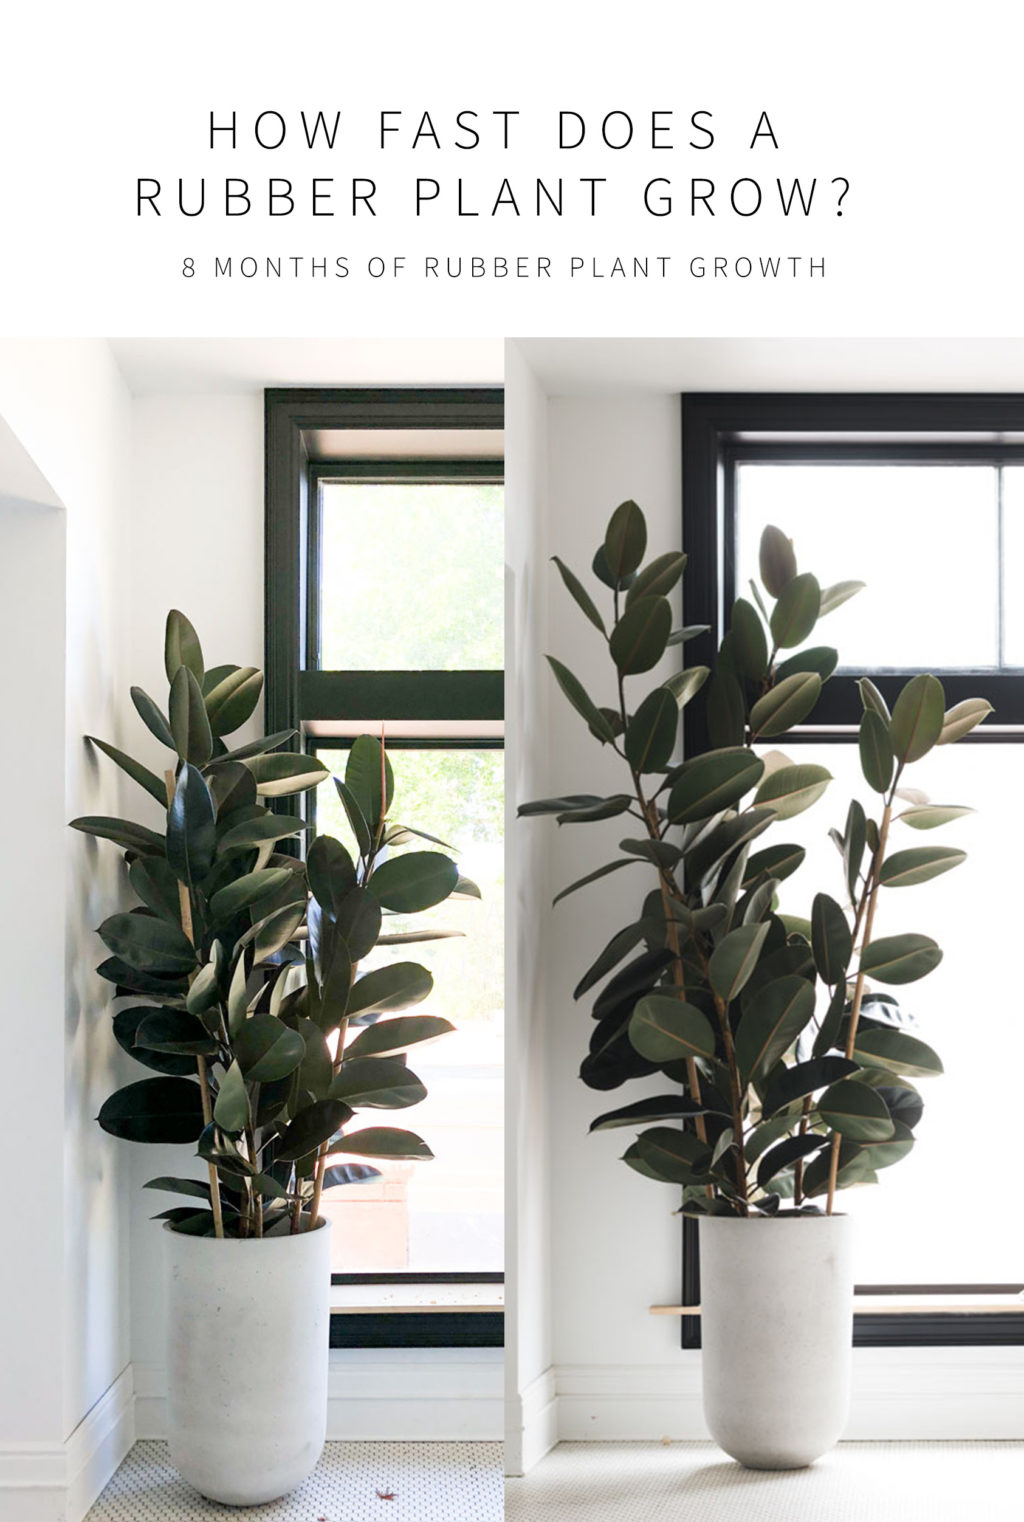 My rubber tree, as wonderful as it is, is getting too big for my